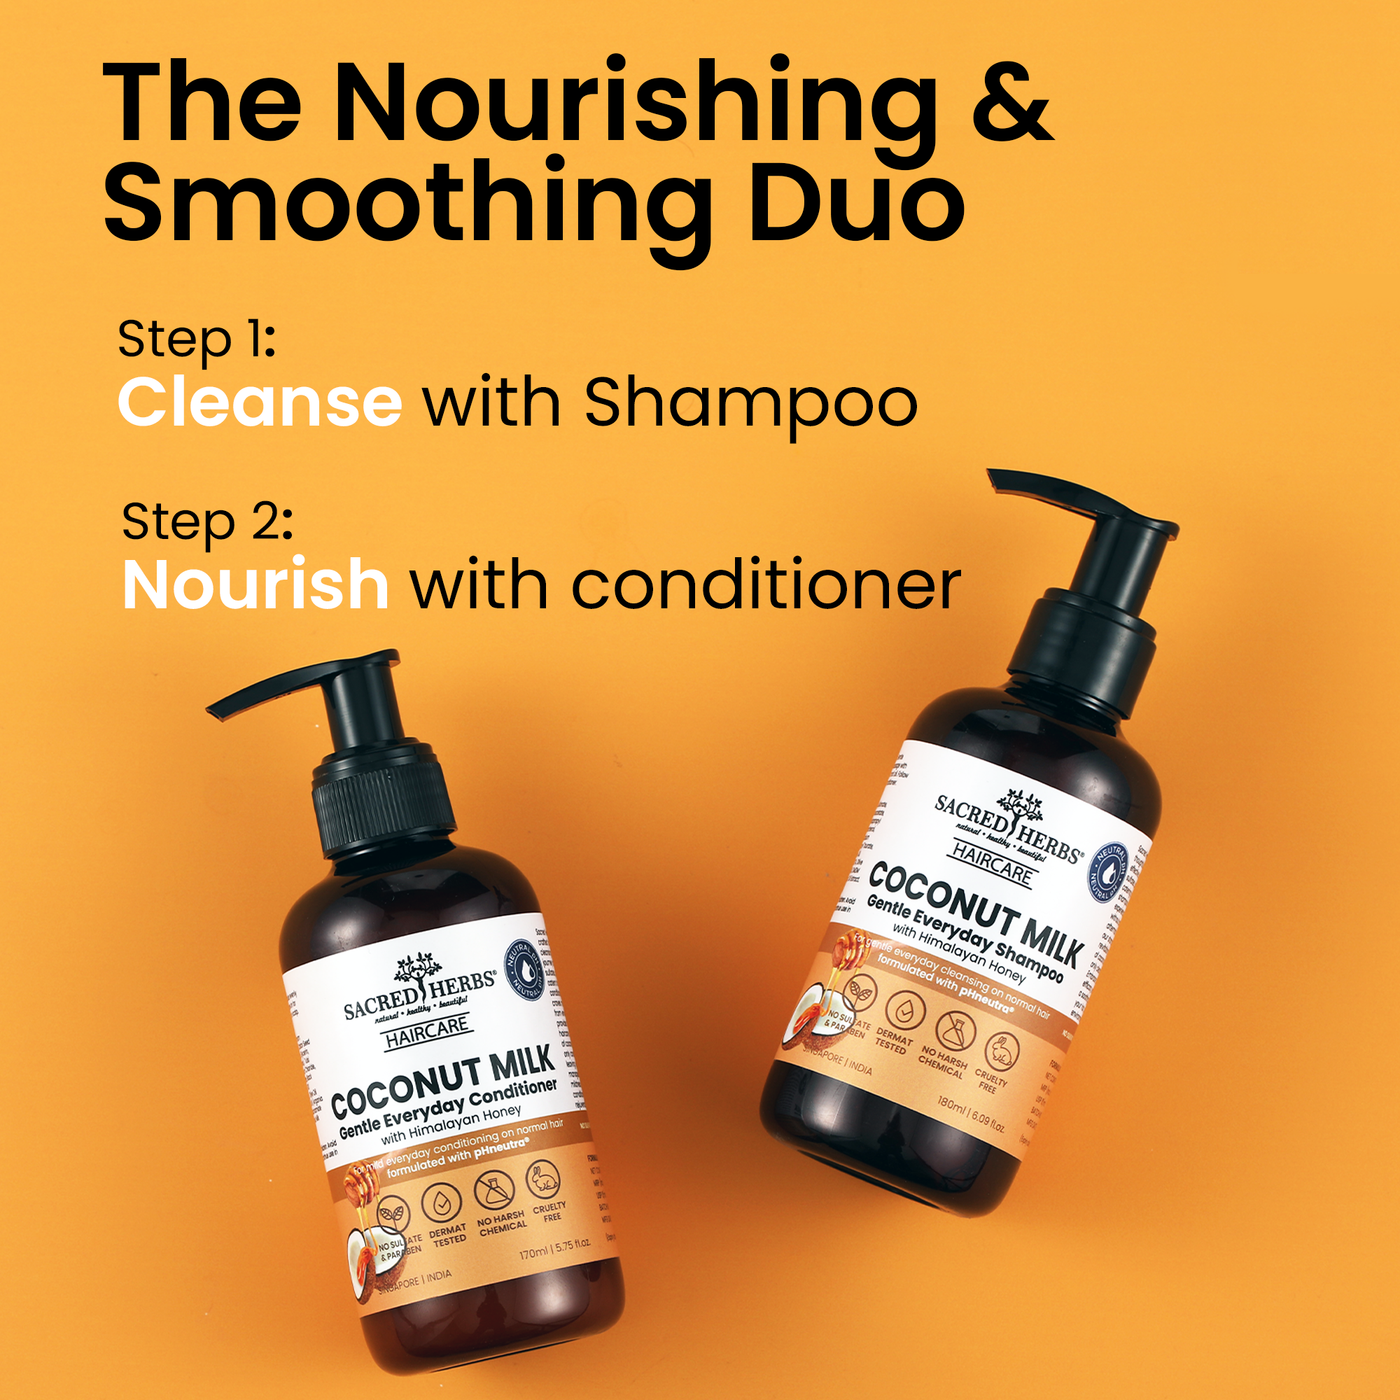 Coconut Milk Gentle Cleansing Shampoo with Himalayan Honey